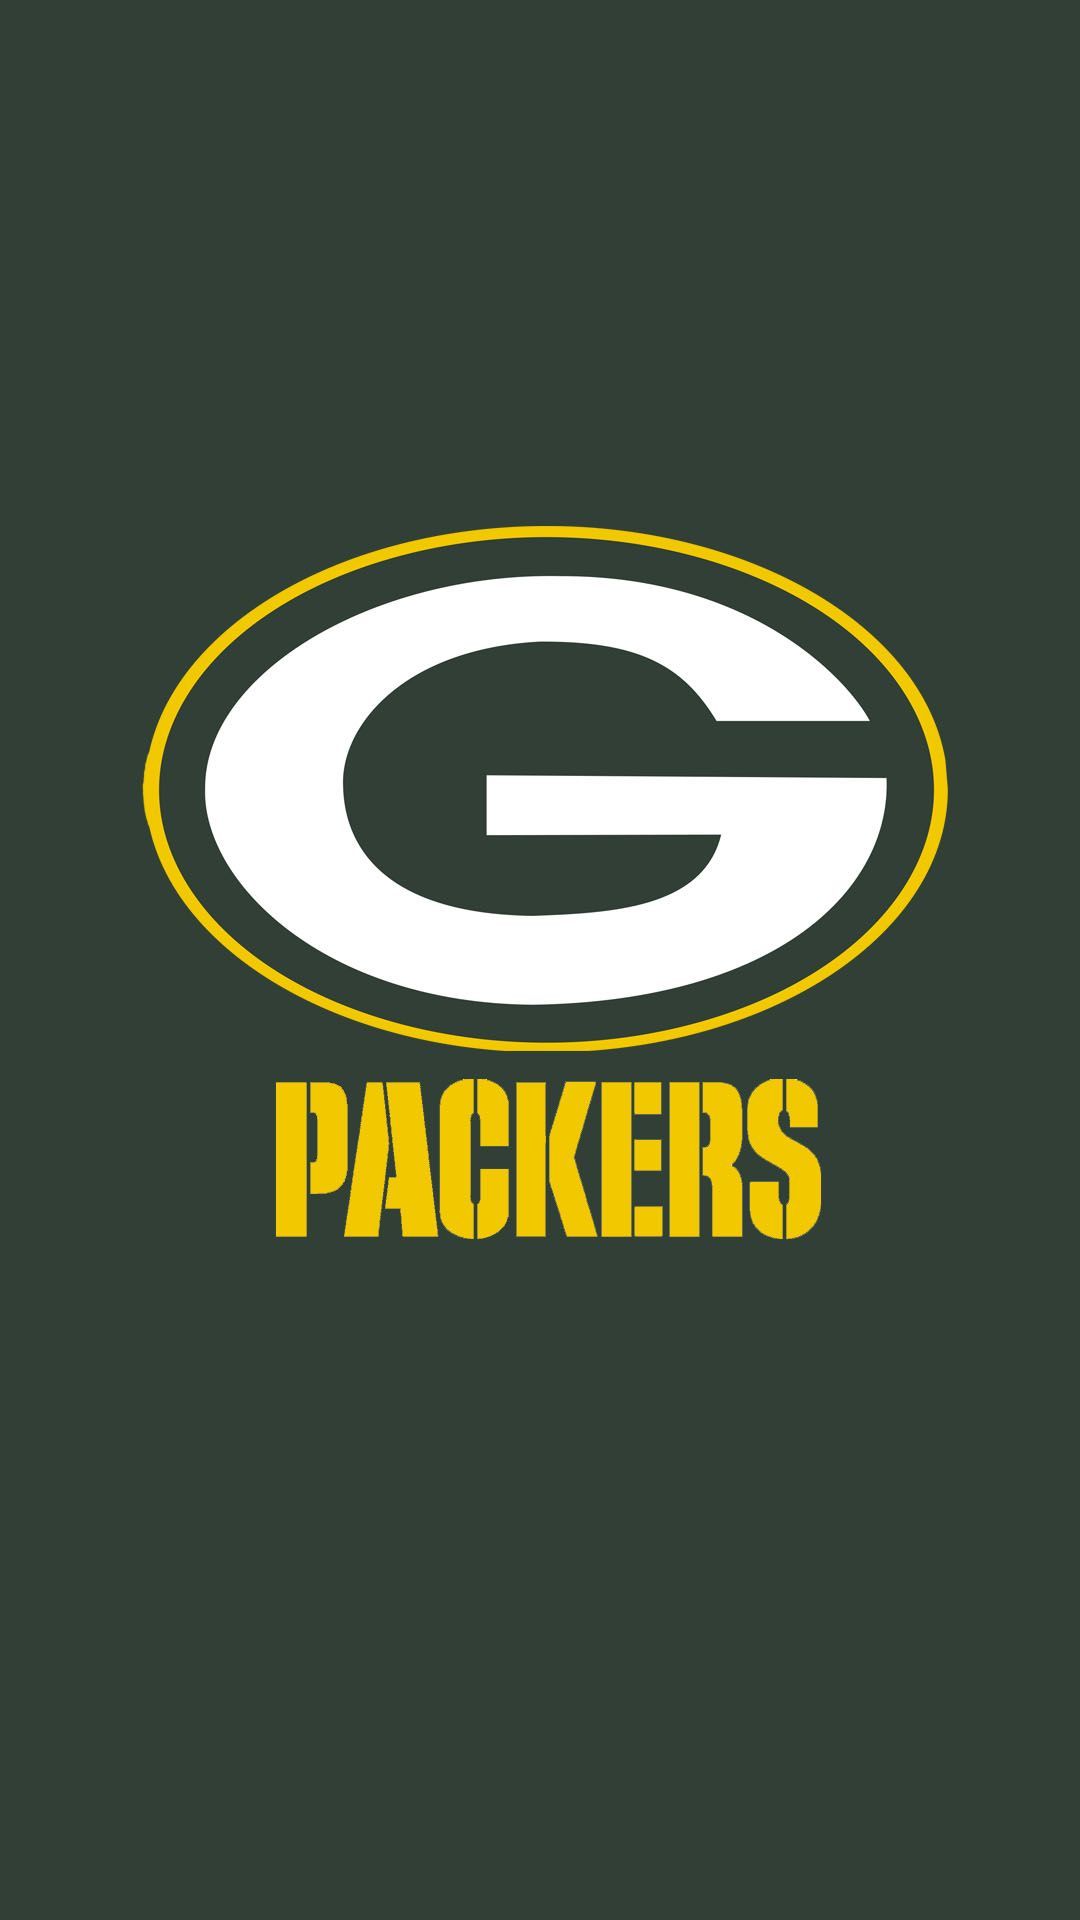 Green Bay Packers Phone Wallpapers - Wallpaper Cave